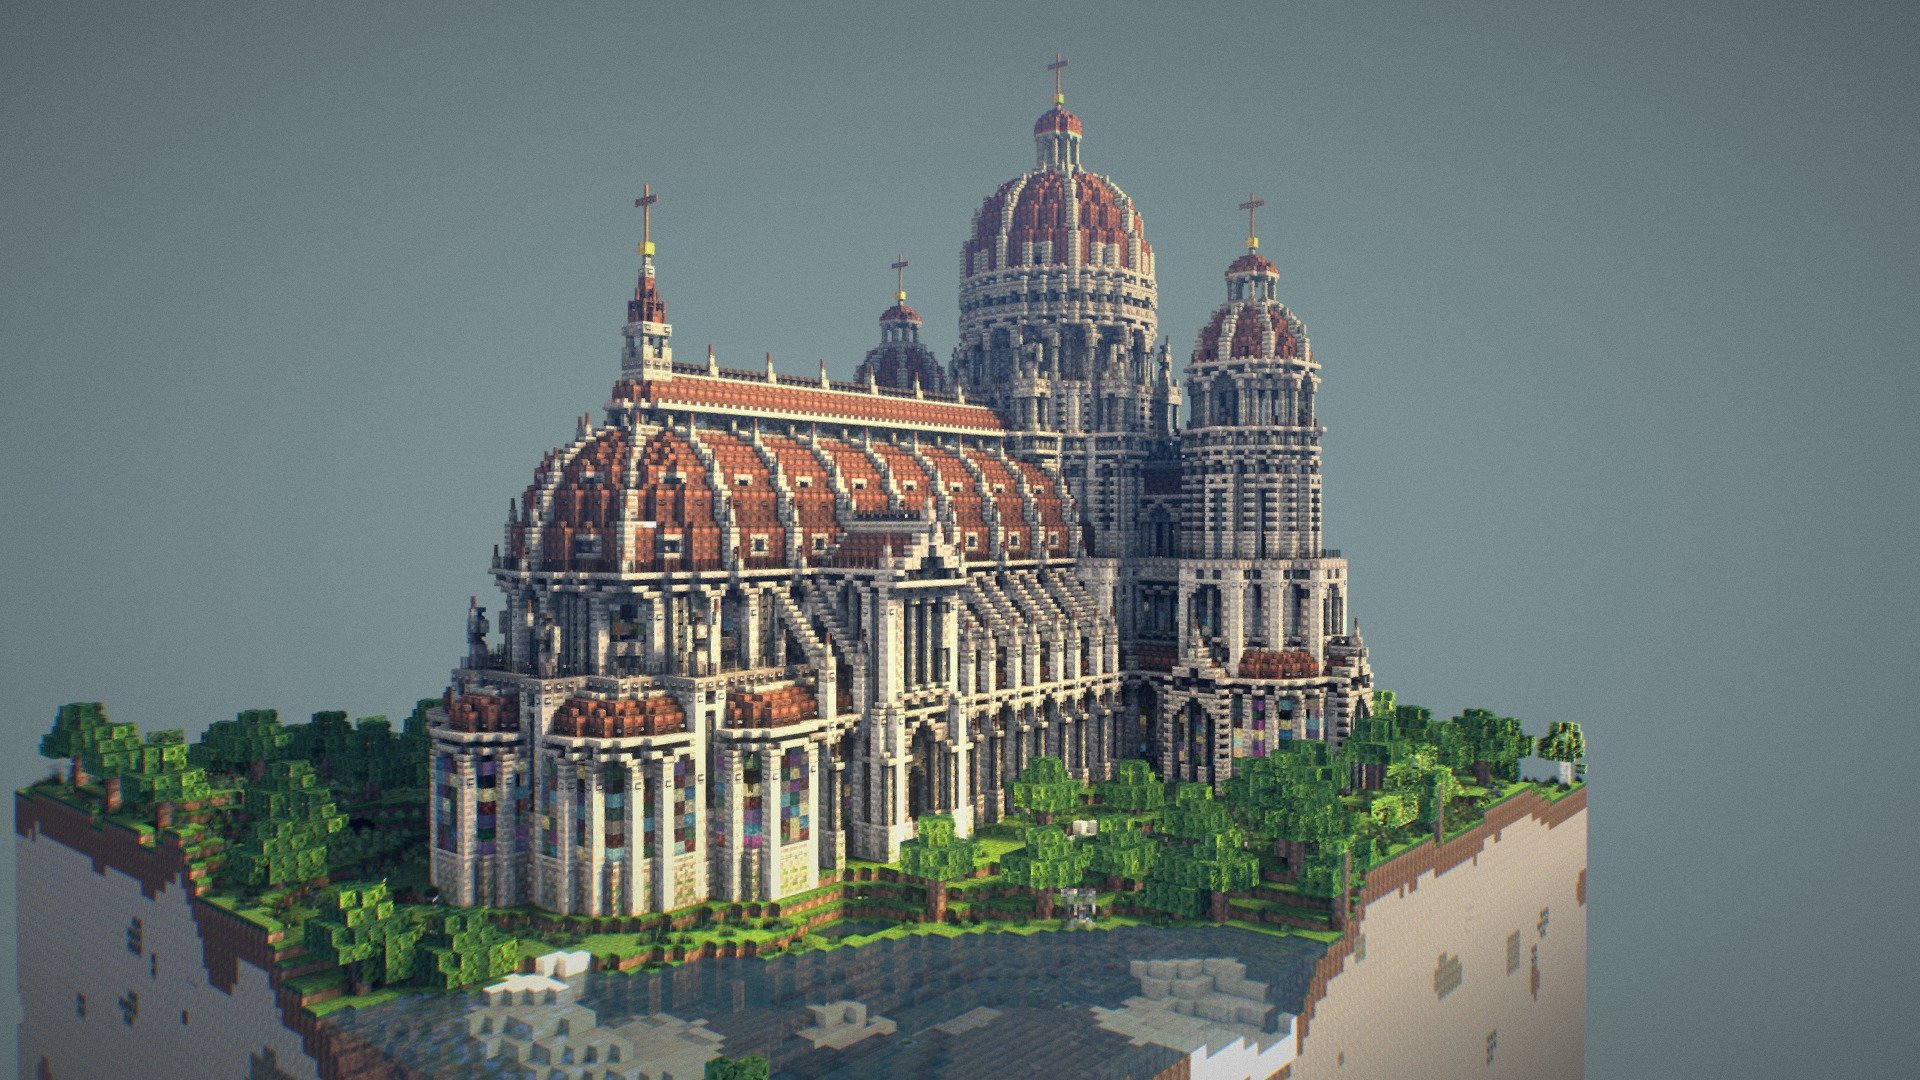 This is a build that I use as a parkour map on my friend's server. Please ignore the model export errors.

Map download:
http://www.mediafire.com/download/r9etmbpgtr2a8g3/Cathedral.rar

minecraft 1.7+ with Conquest texturepack


This model is featured in the official Sketchfab VR app:
 - Cathedral - Download Free 3D model by patrix 3d model